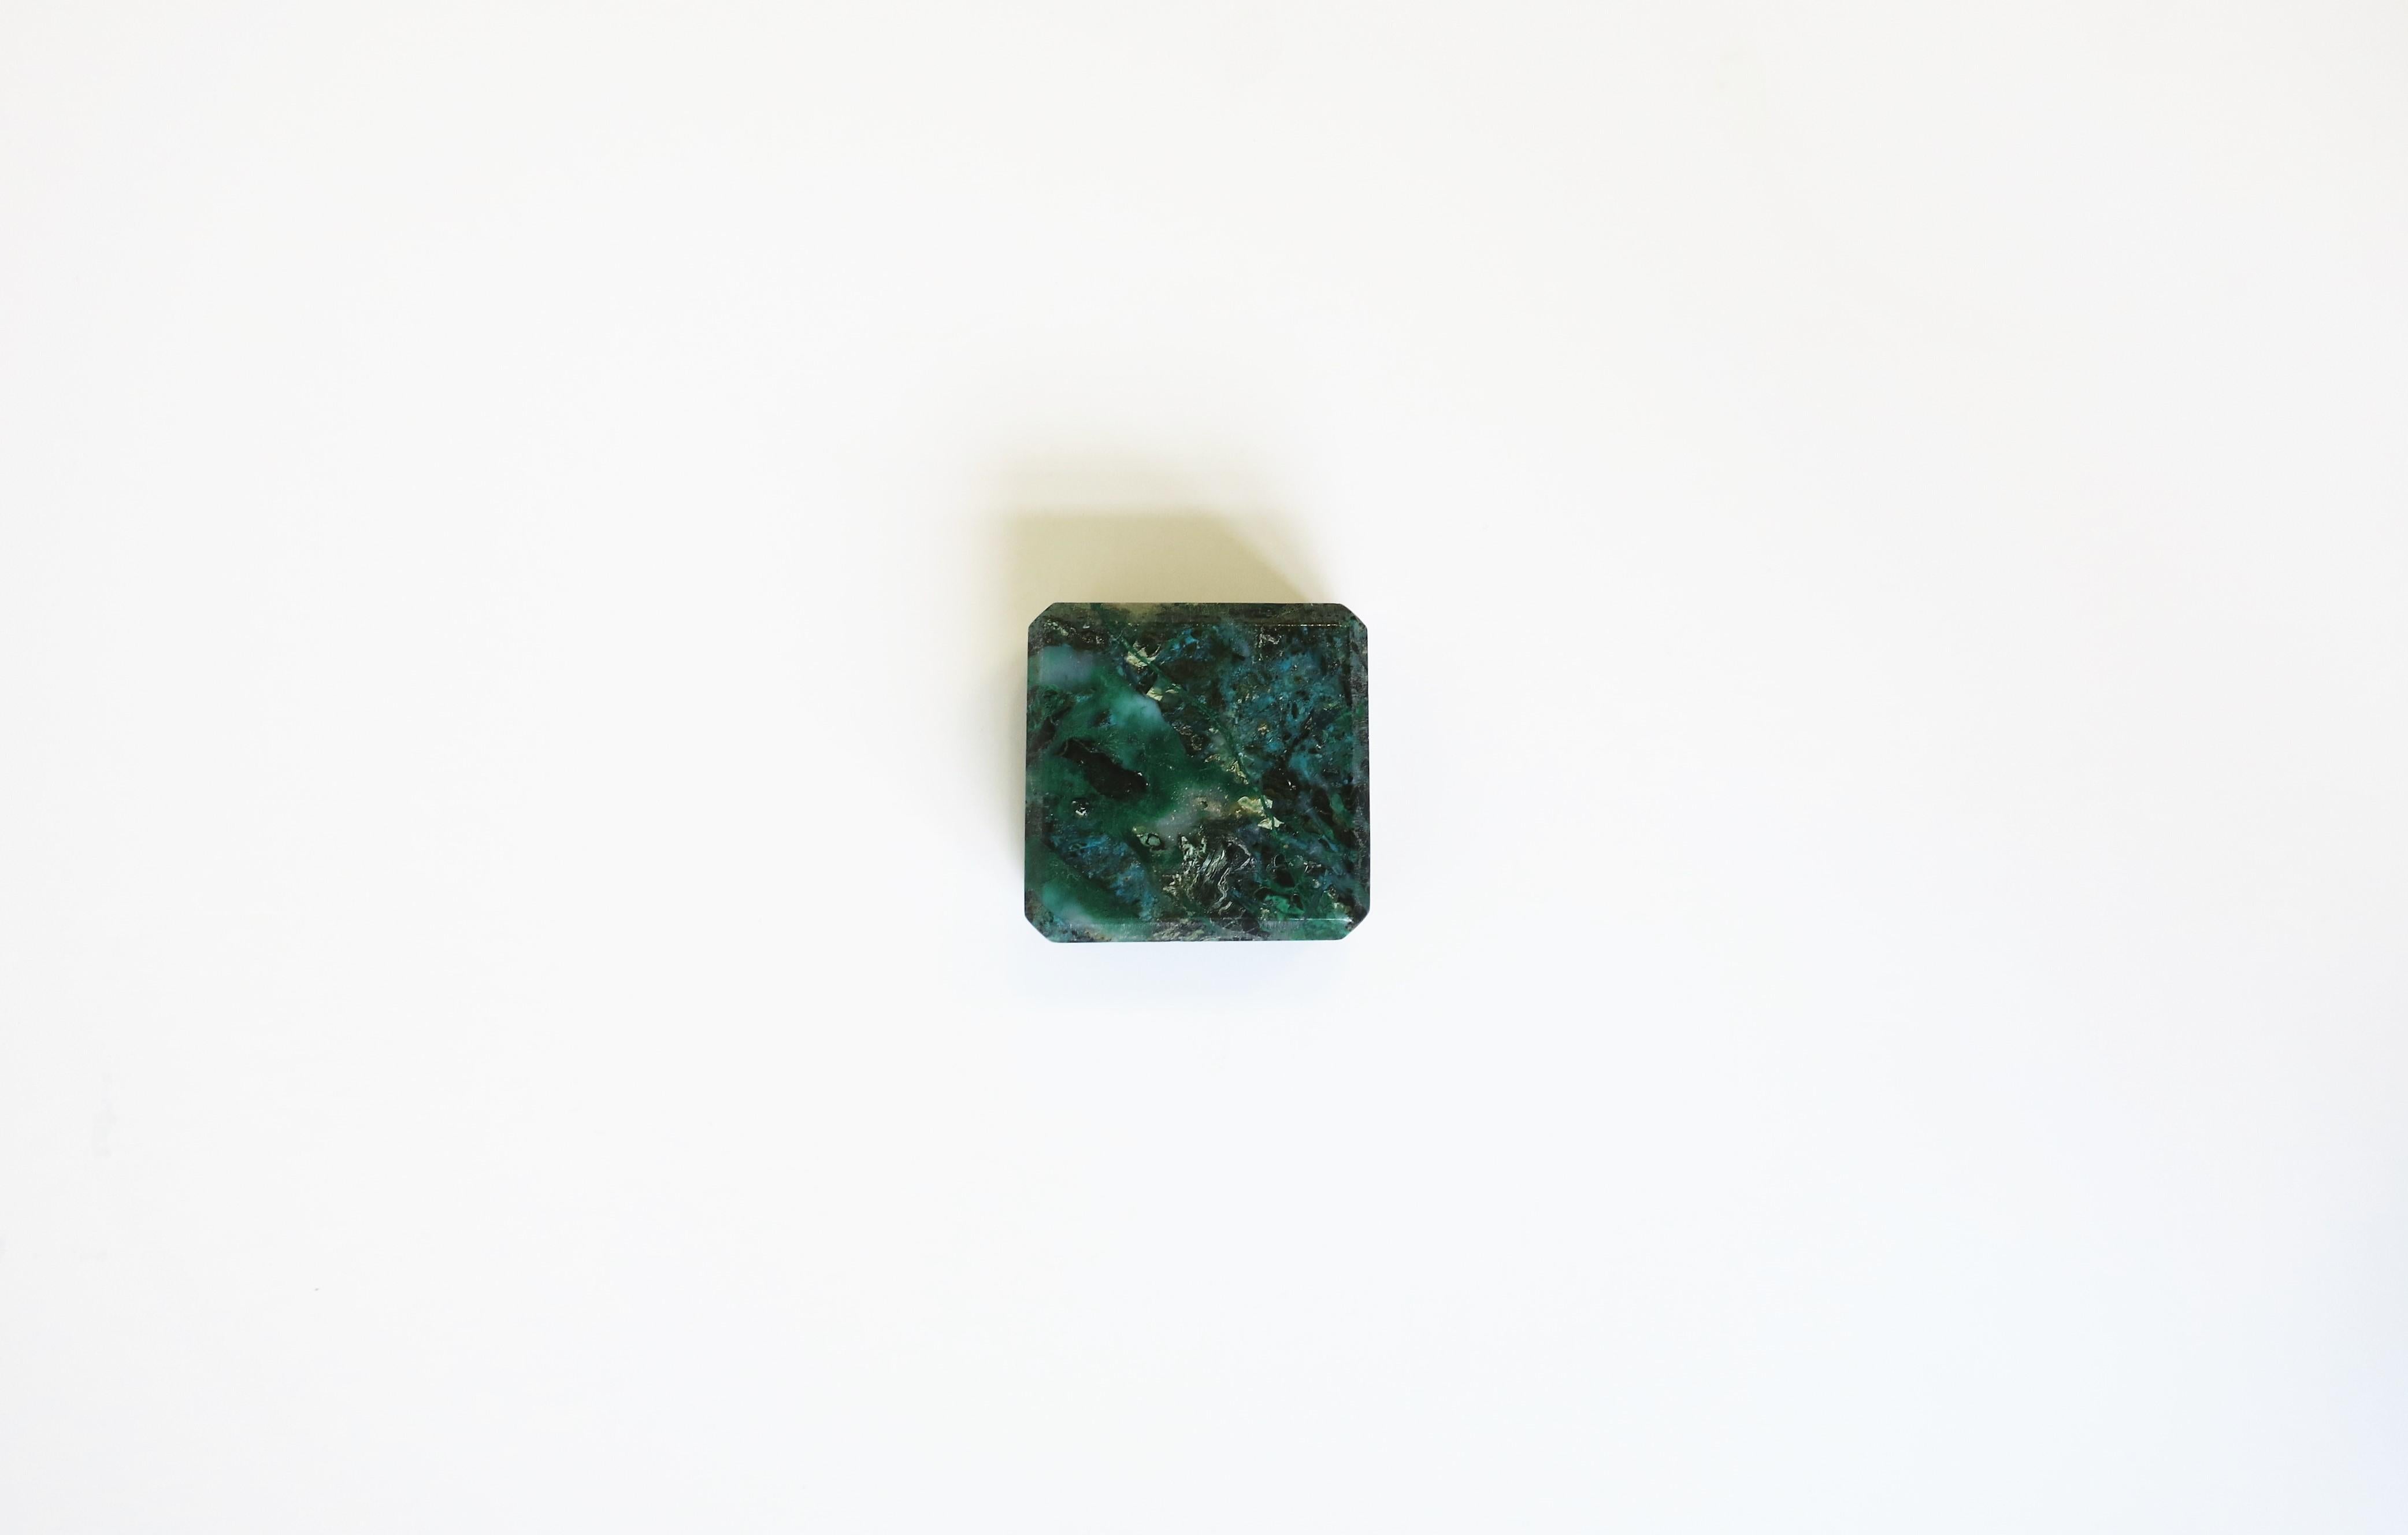 A beautiful small natural stone object paperweight, circa 20th century. Piece is a hard-stone, in a gem cut shape (square, beveled edge, cut corners), polished smooth. Hues include emerald green, light green, light blue and black. A great decorative